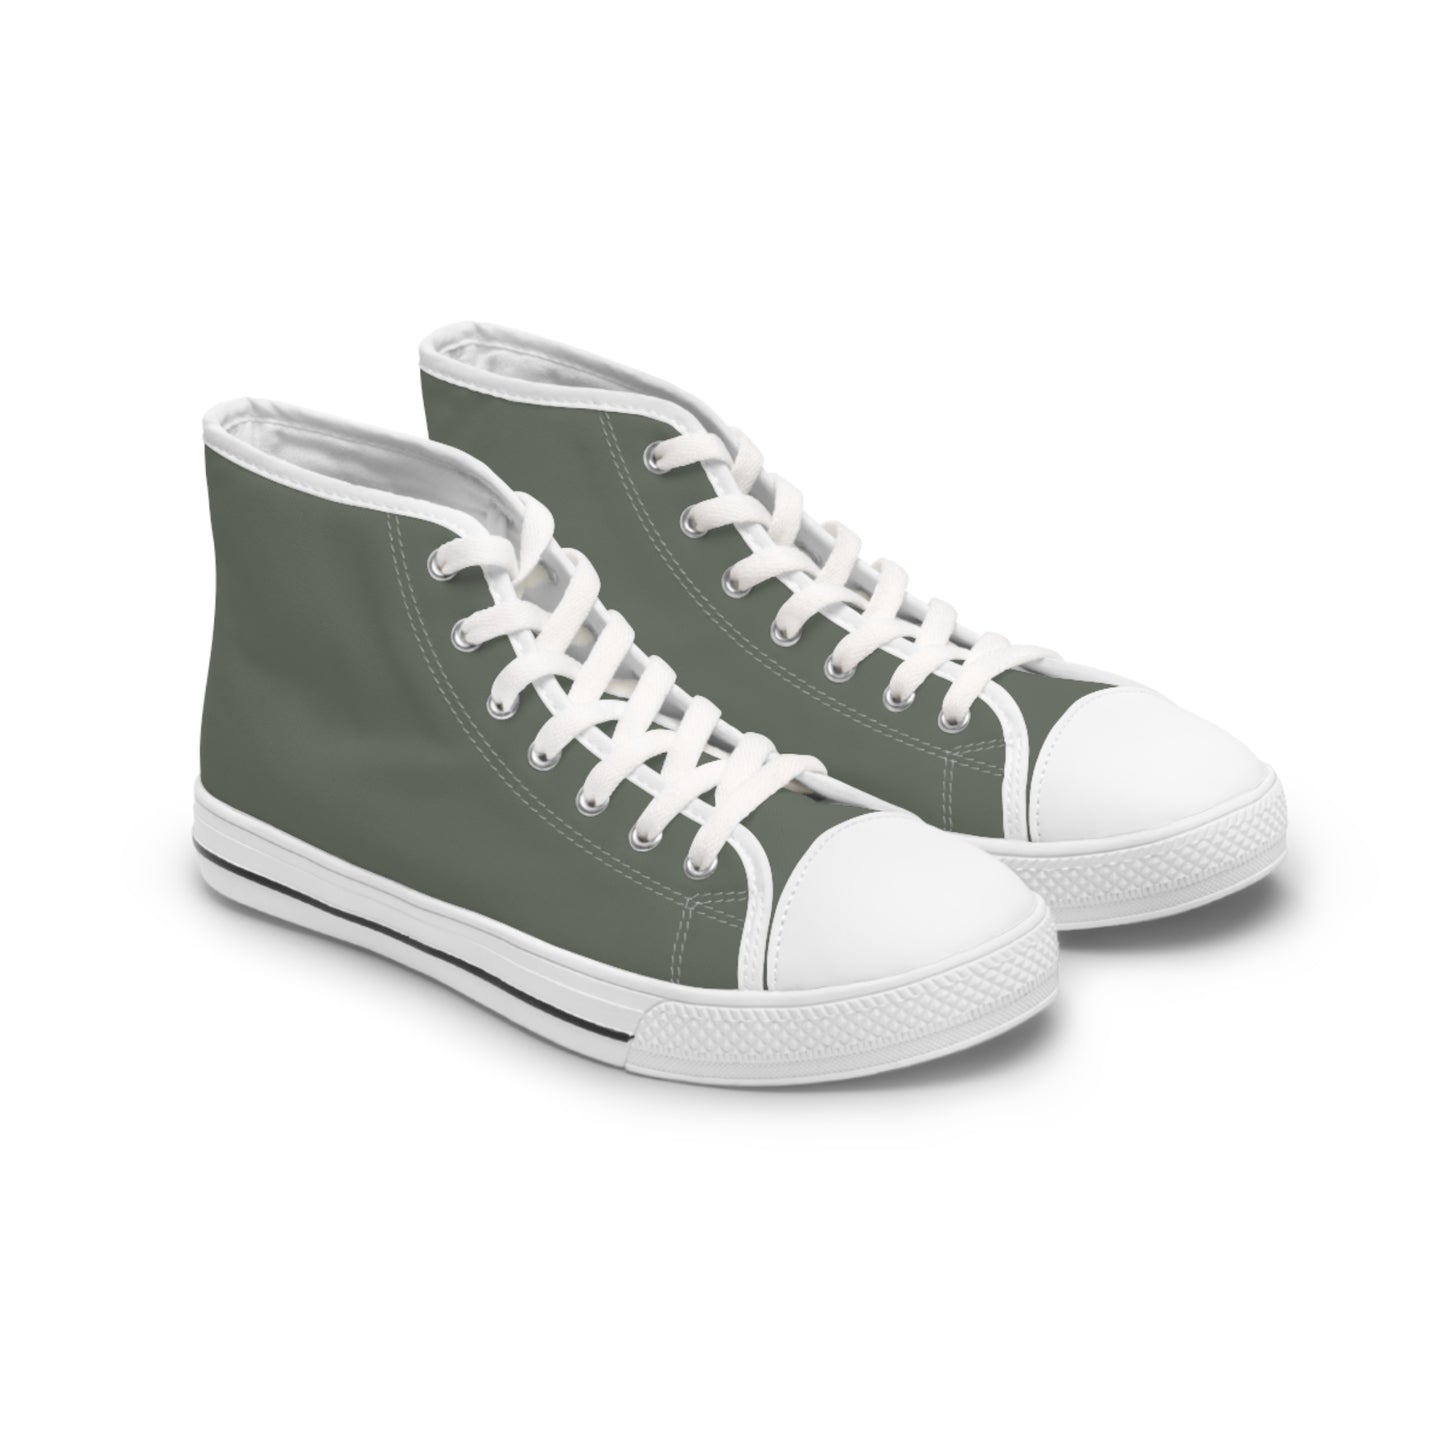 Women's Canvas High Top Solid Color Sneakers - Drab Olive Gray US 12 White sole